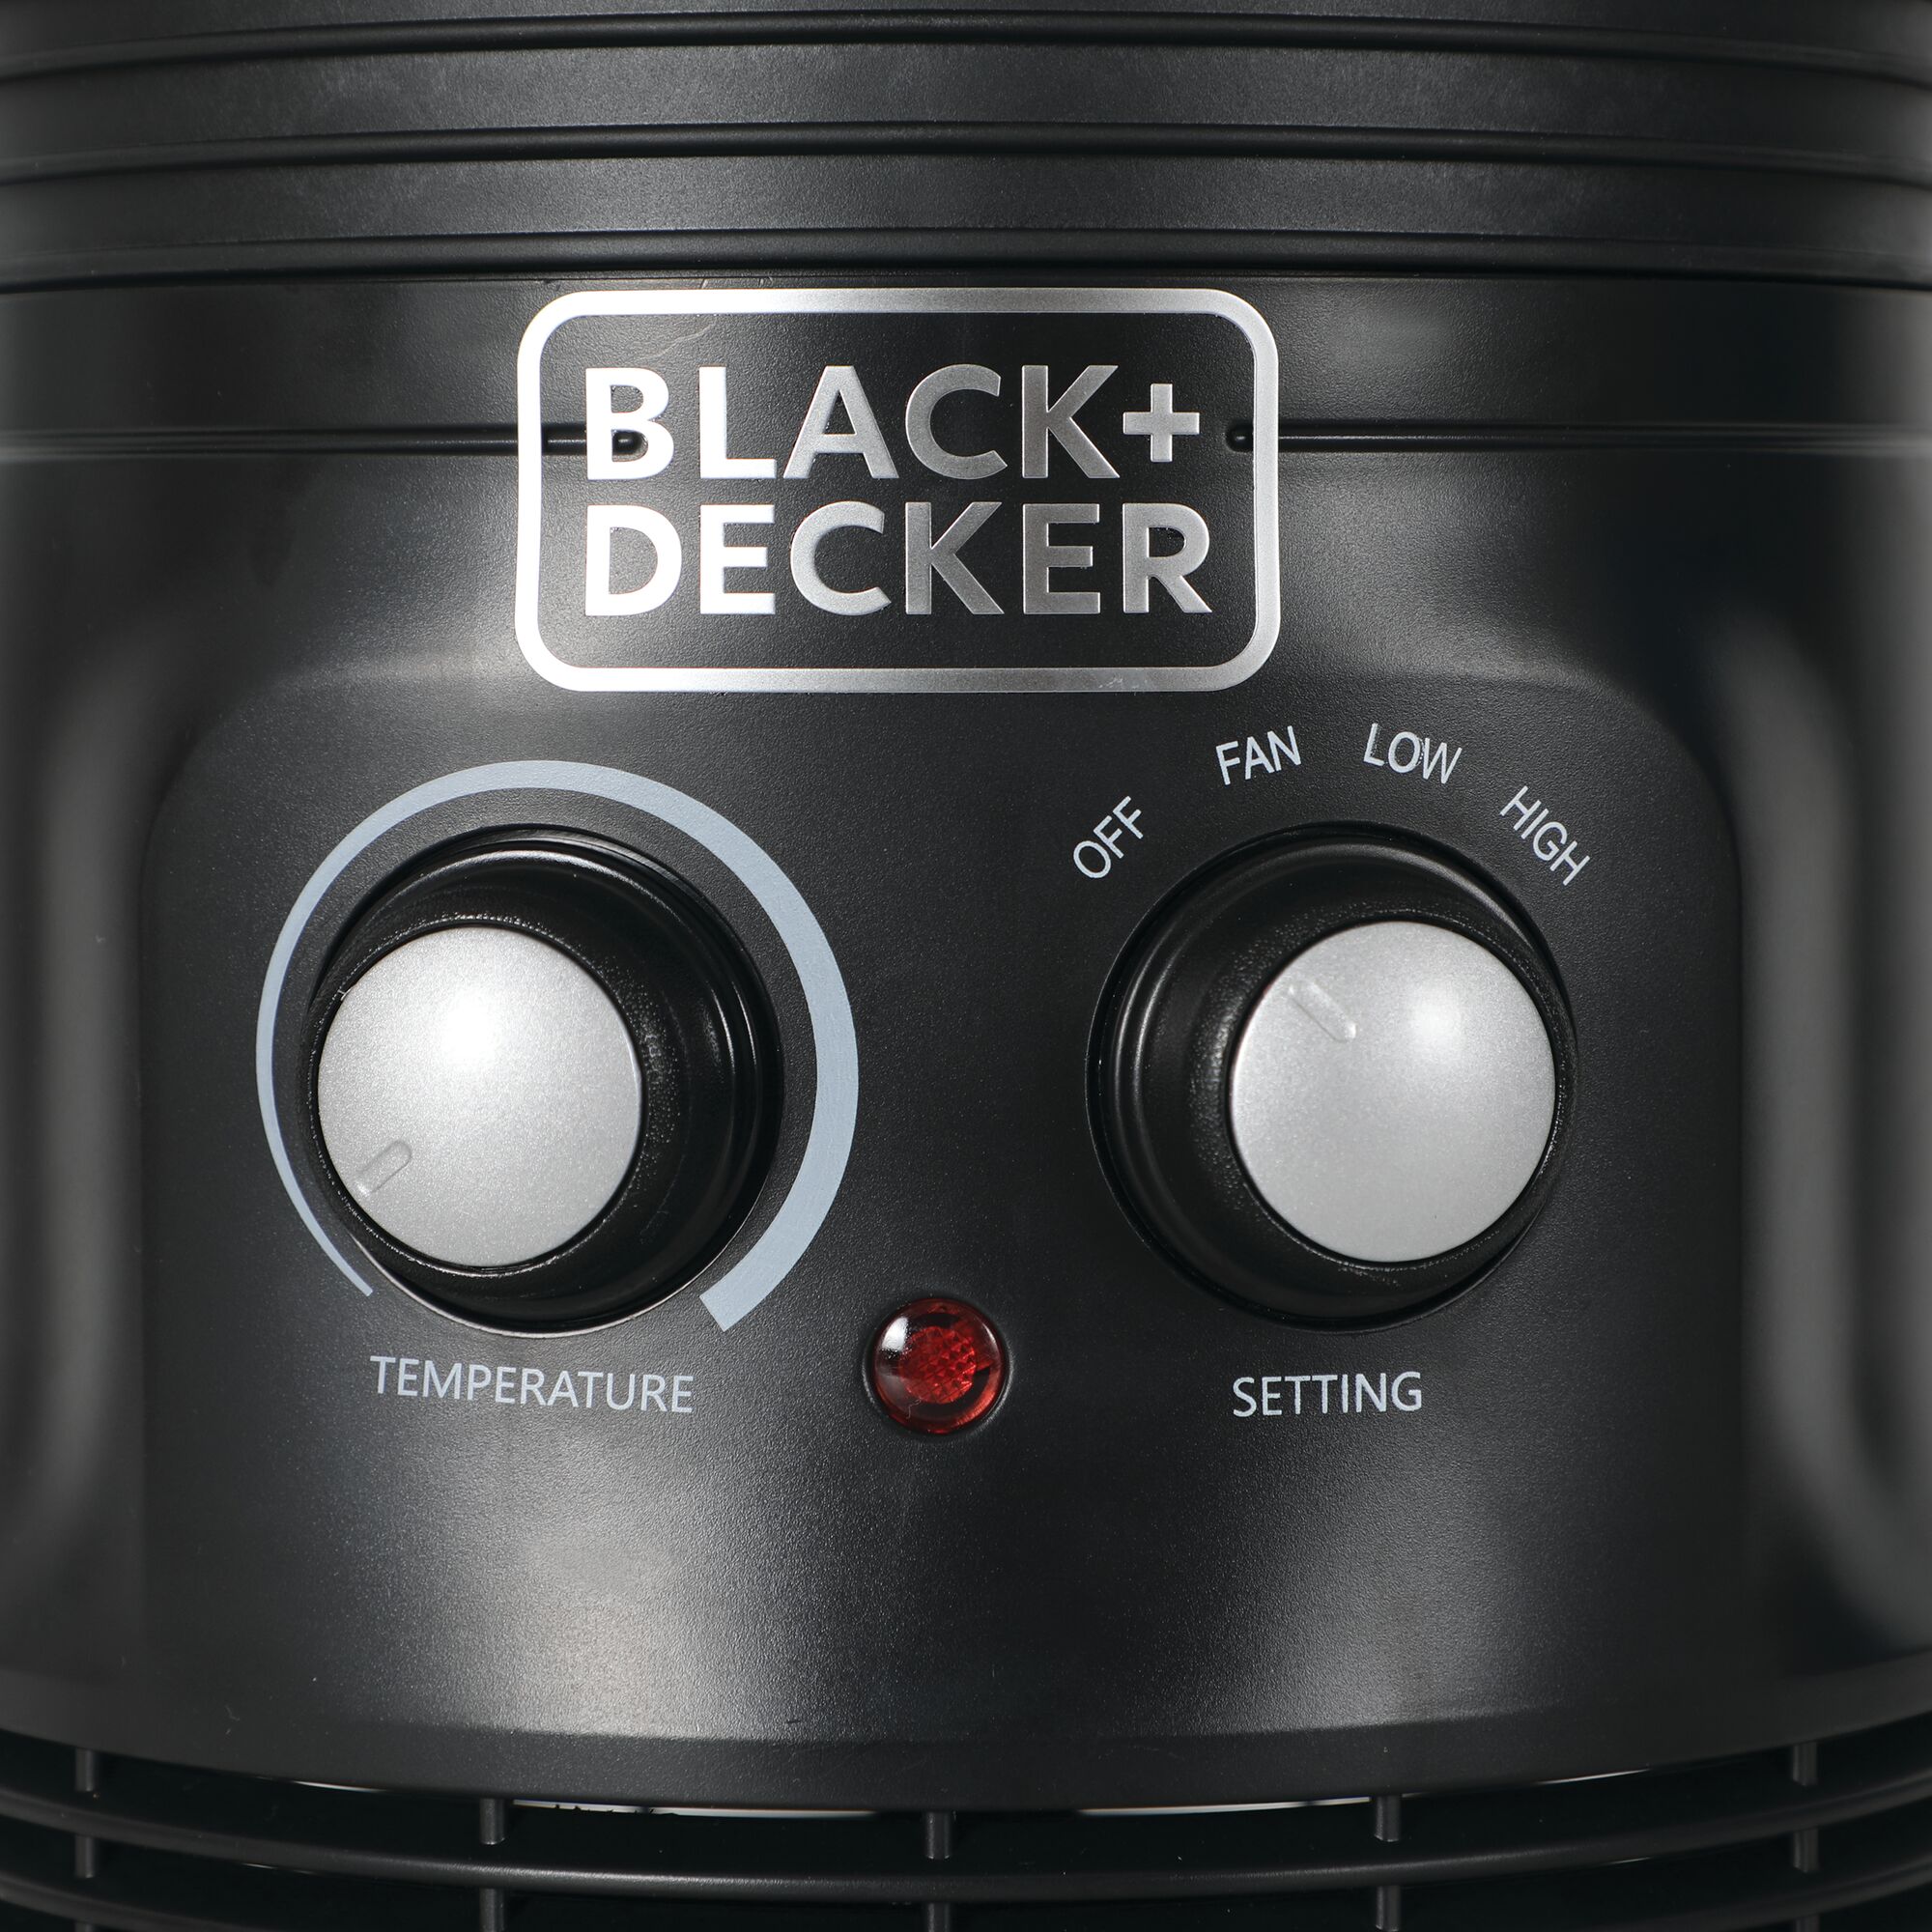 Close-up photo of the dial controls and LED indicator on the BLACK+DECKER Heater+Fan